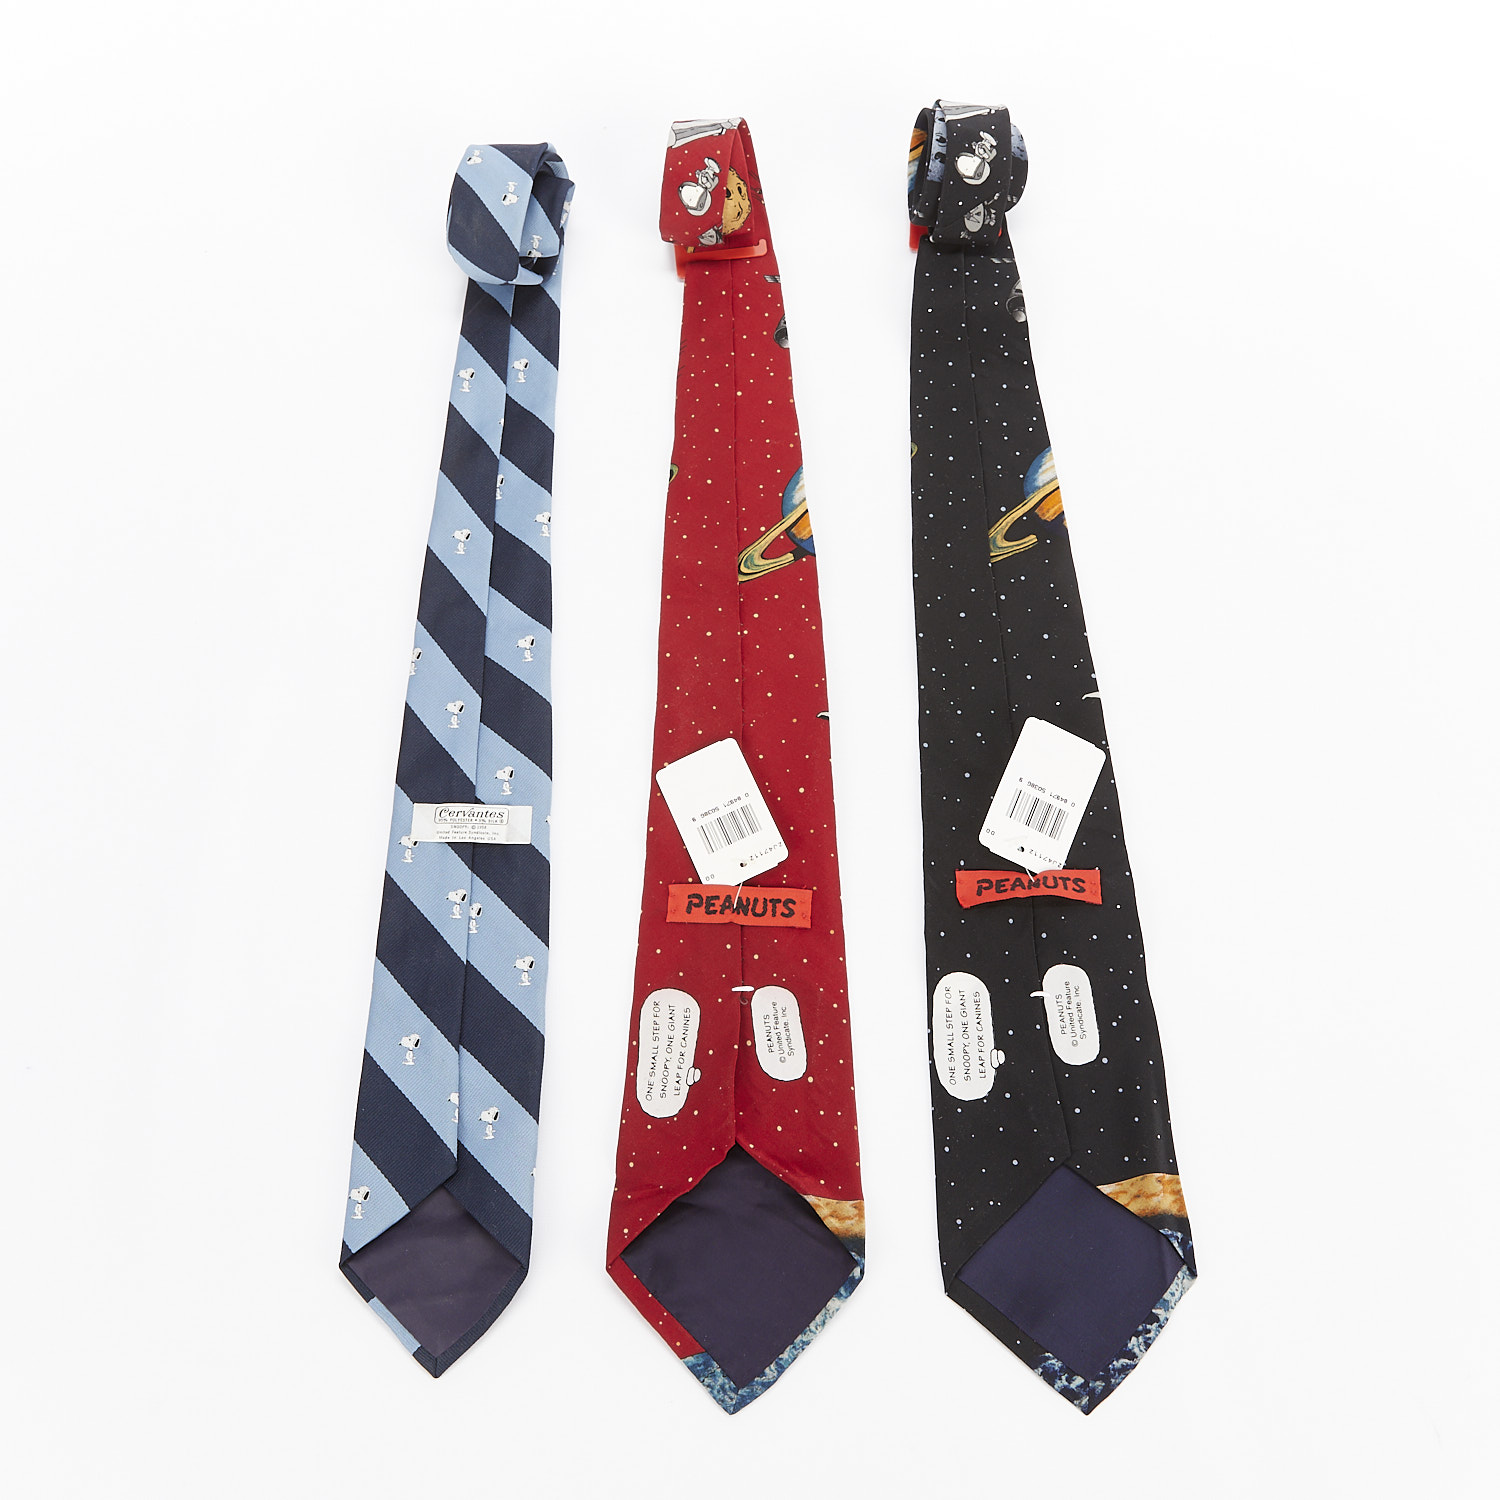 3 Ties of Snoopy - Striped & Space Themed - Image 7 of 10